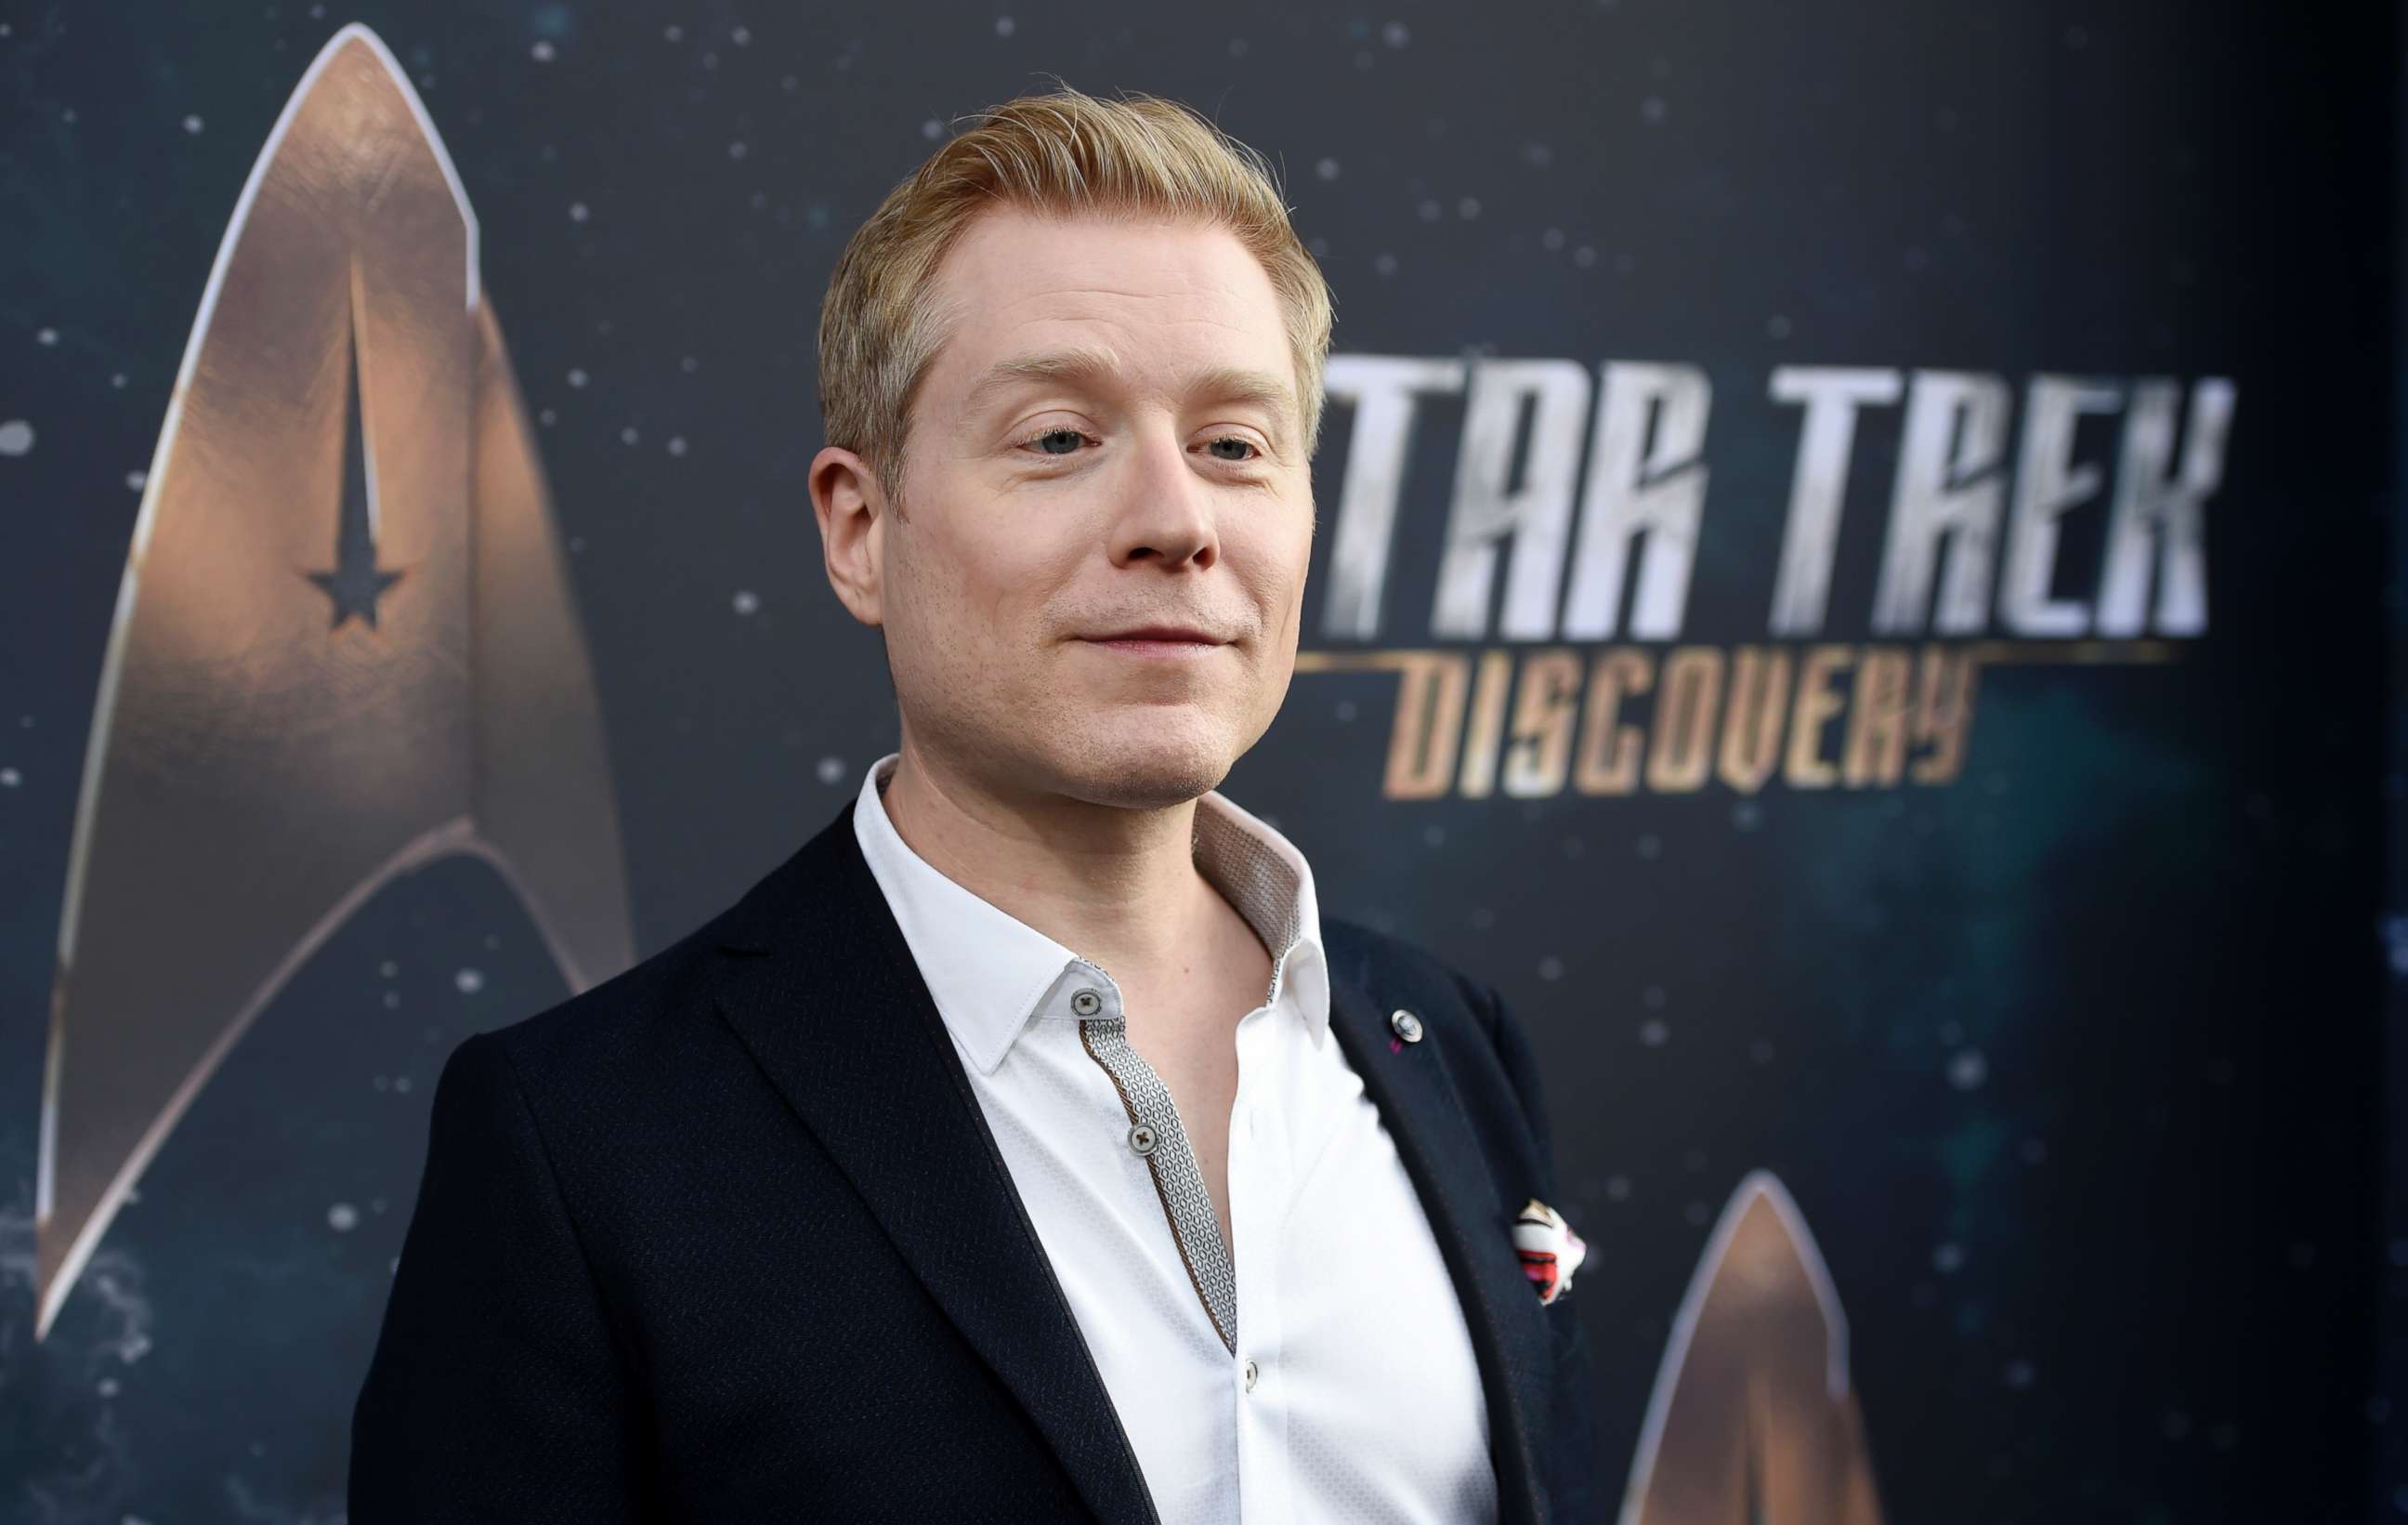 PHOTO: Anthony Rapp, cast member in "Star Trek: Discovery," poses at the premiere of the new television series in Los Angeles, Sept. 19, 2017.